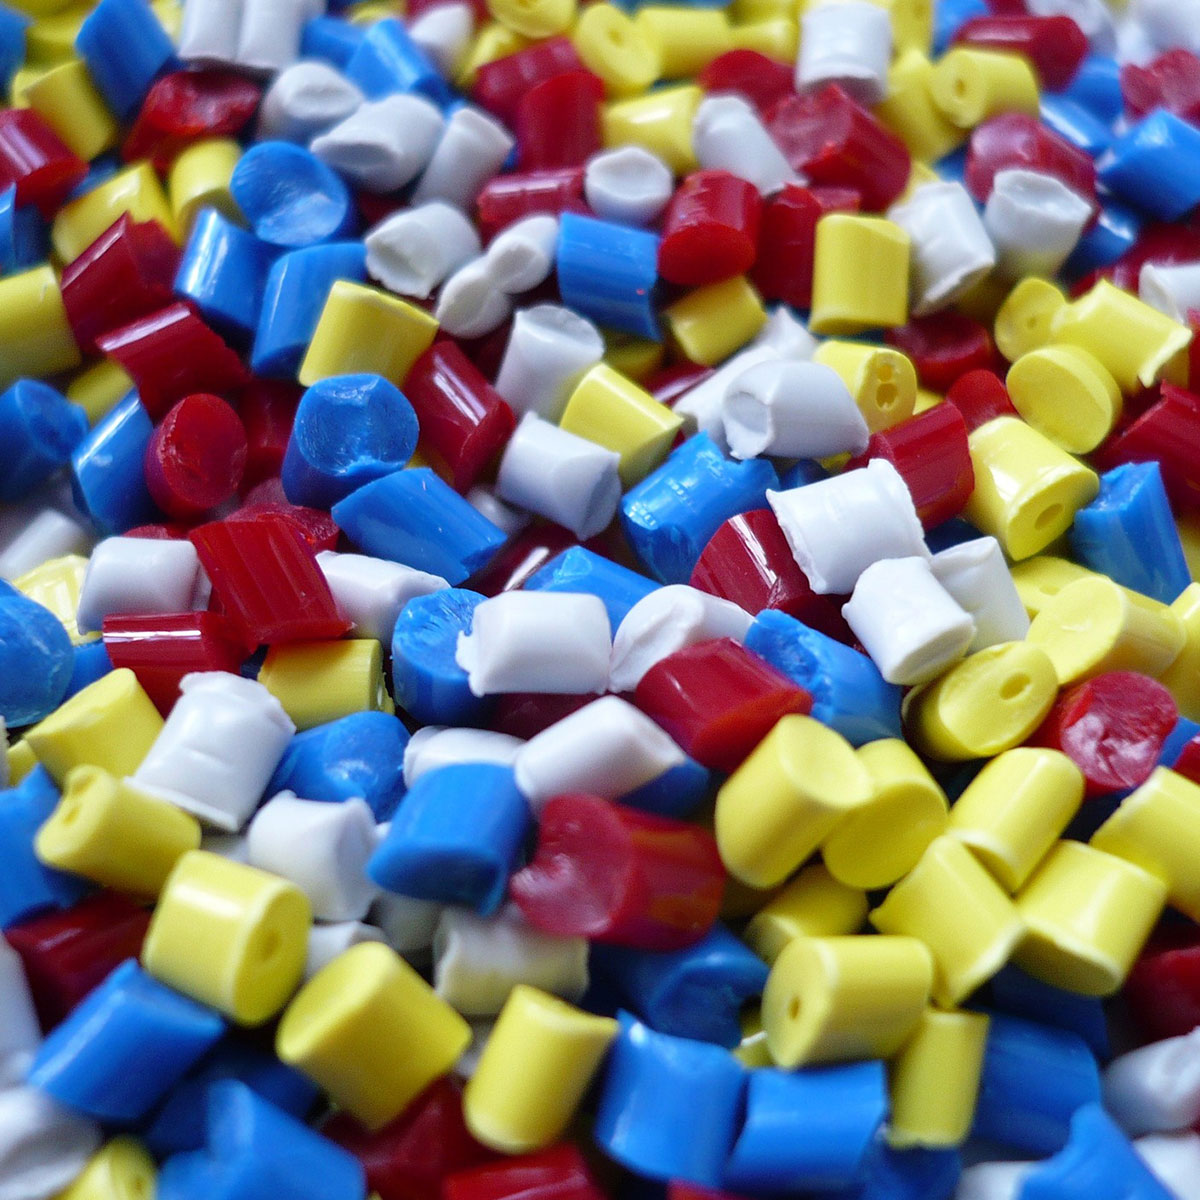 What Are Recycled Plastic Pellets Actually Used For – See the List of What Happens